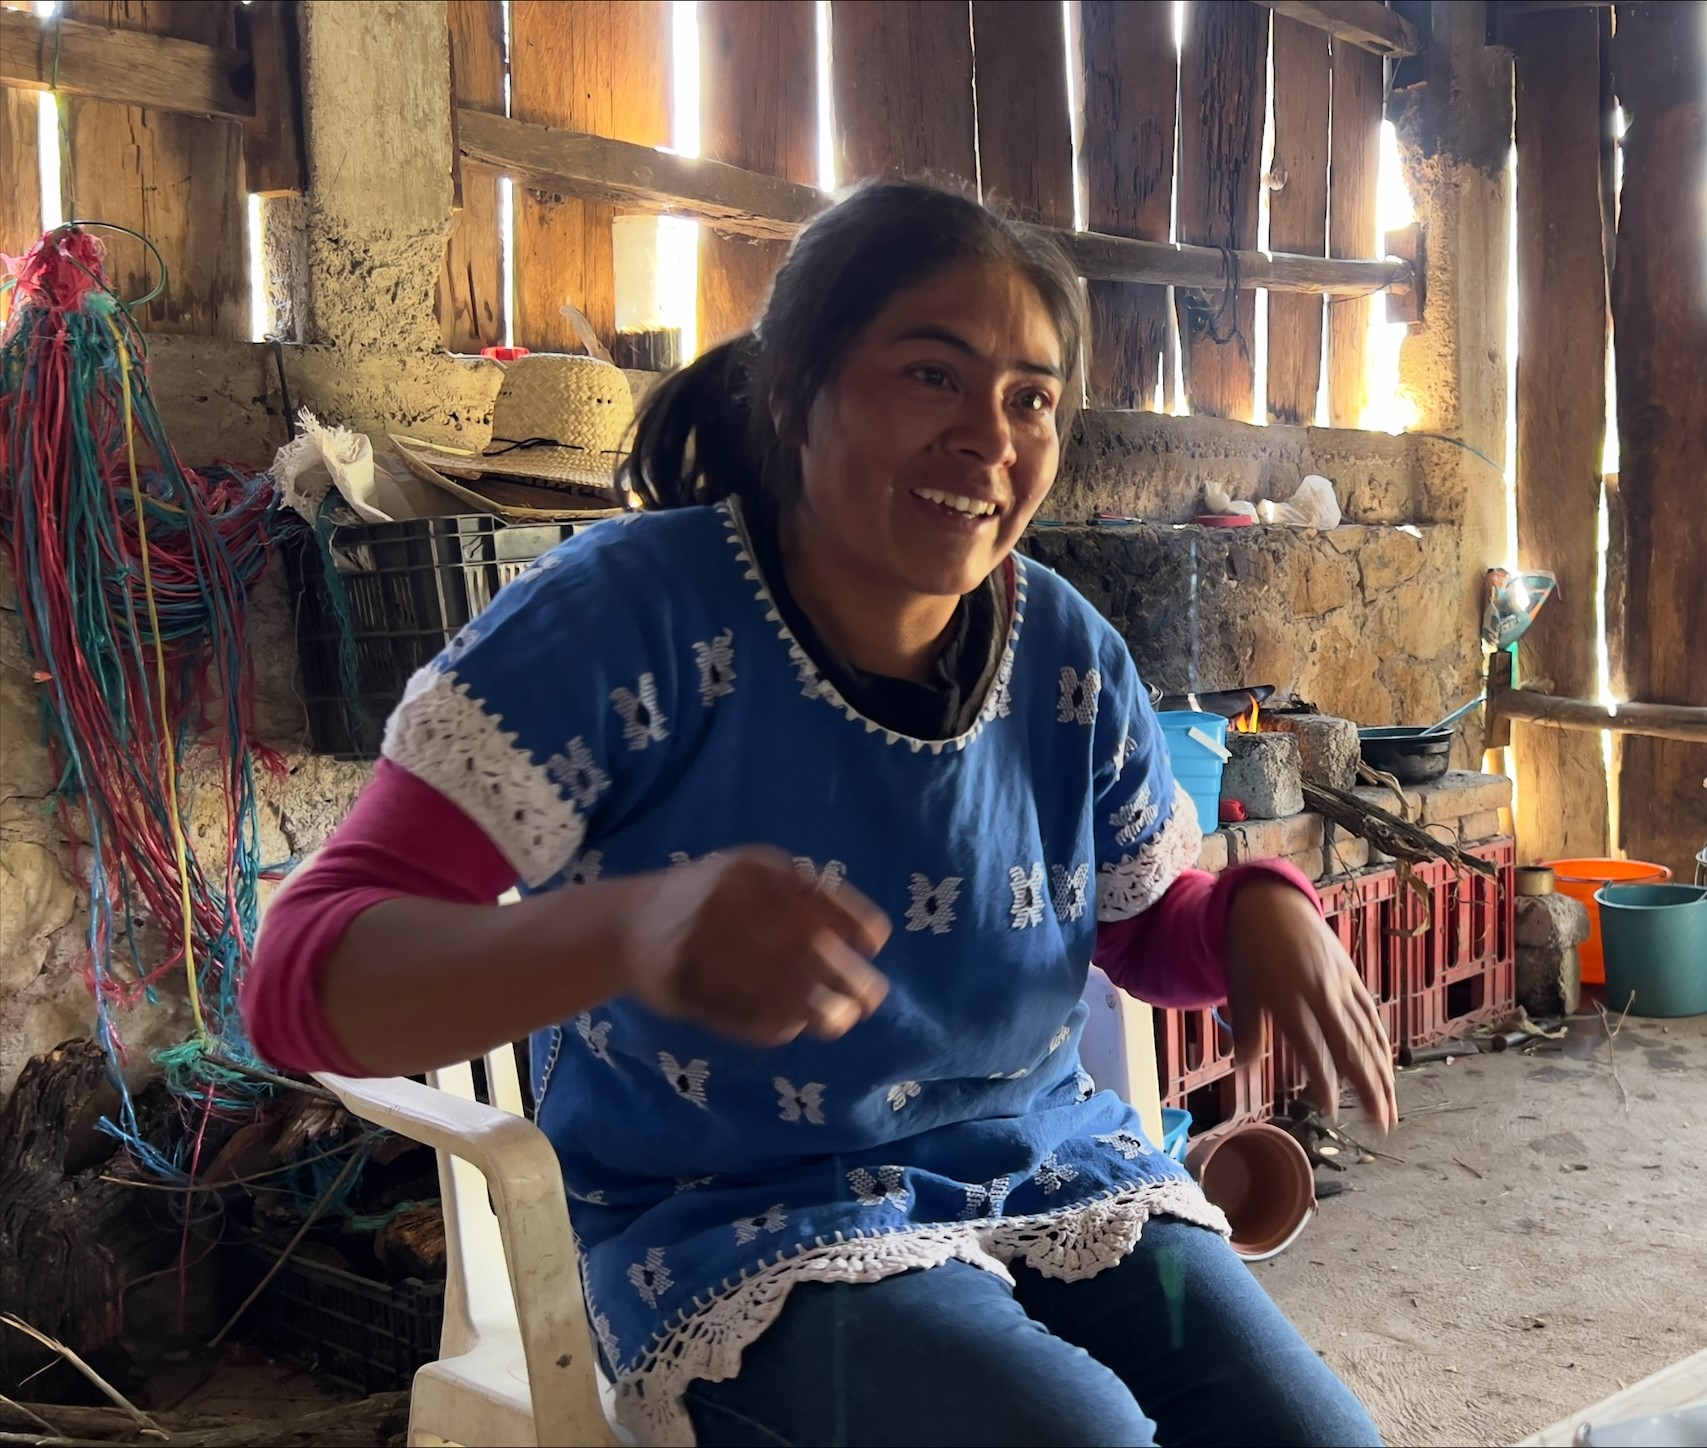 Gabriela continues to advance the gospel in rural Mexico amid ongoing opposition.